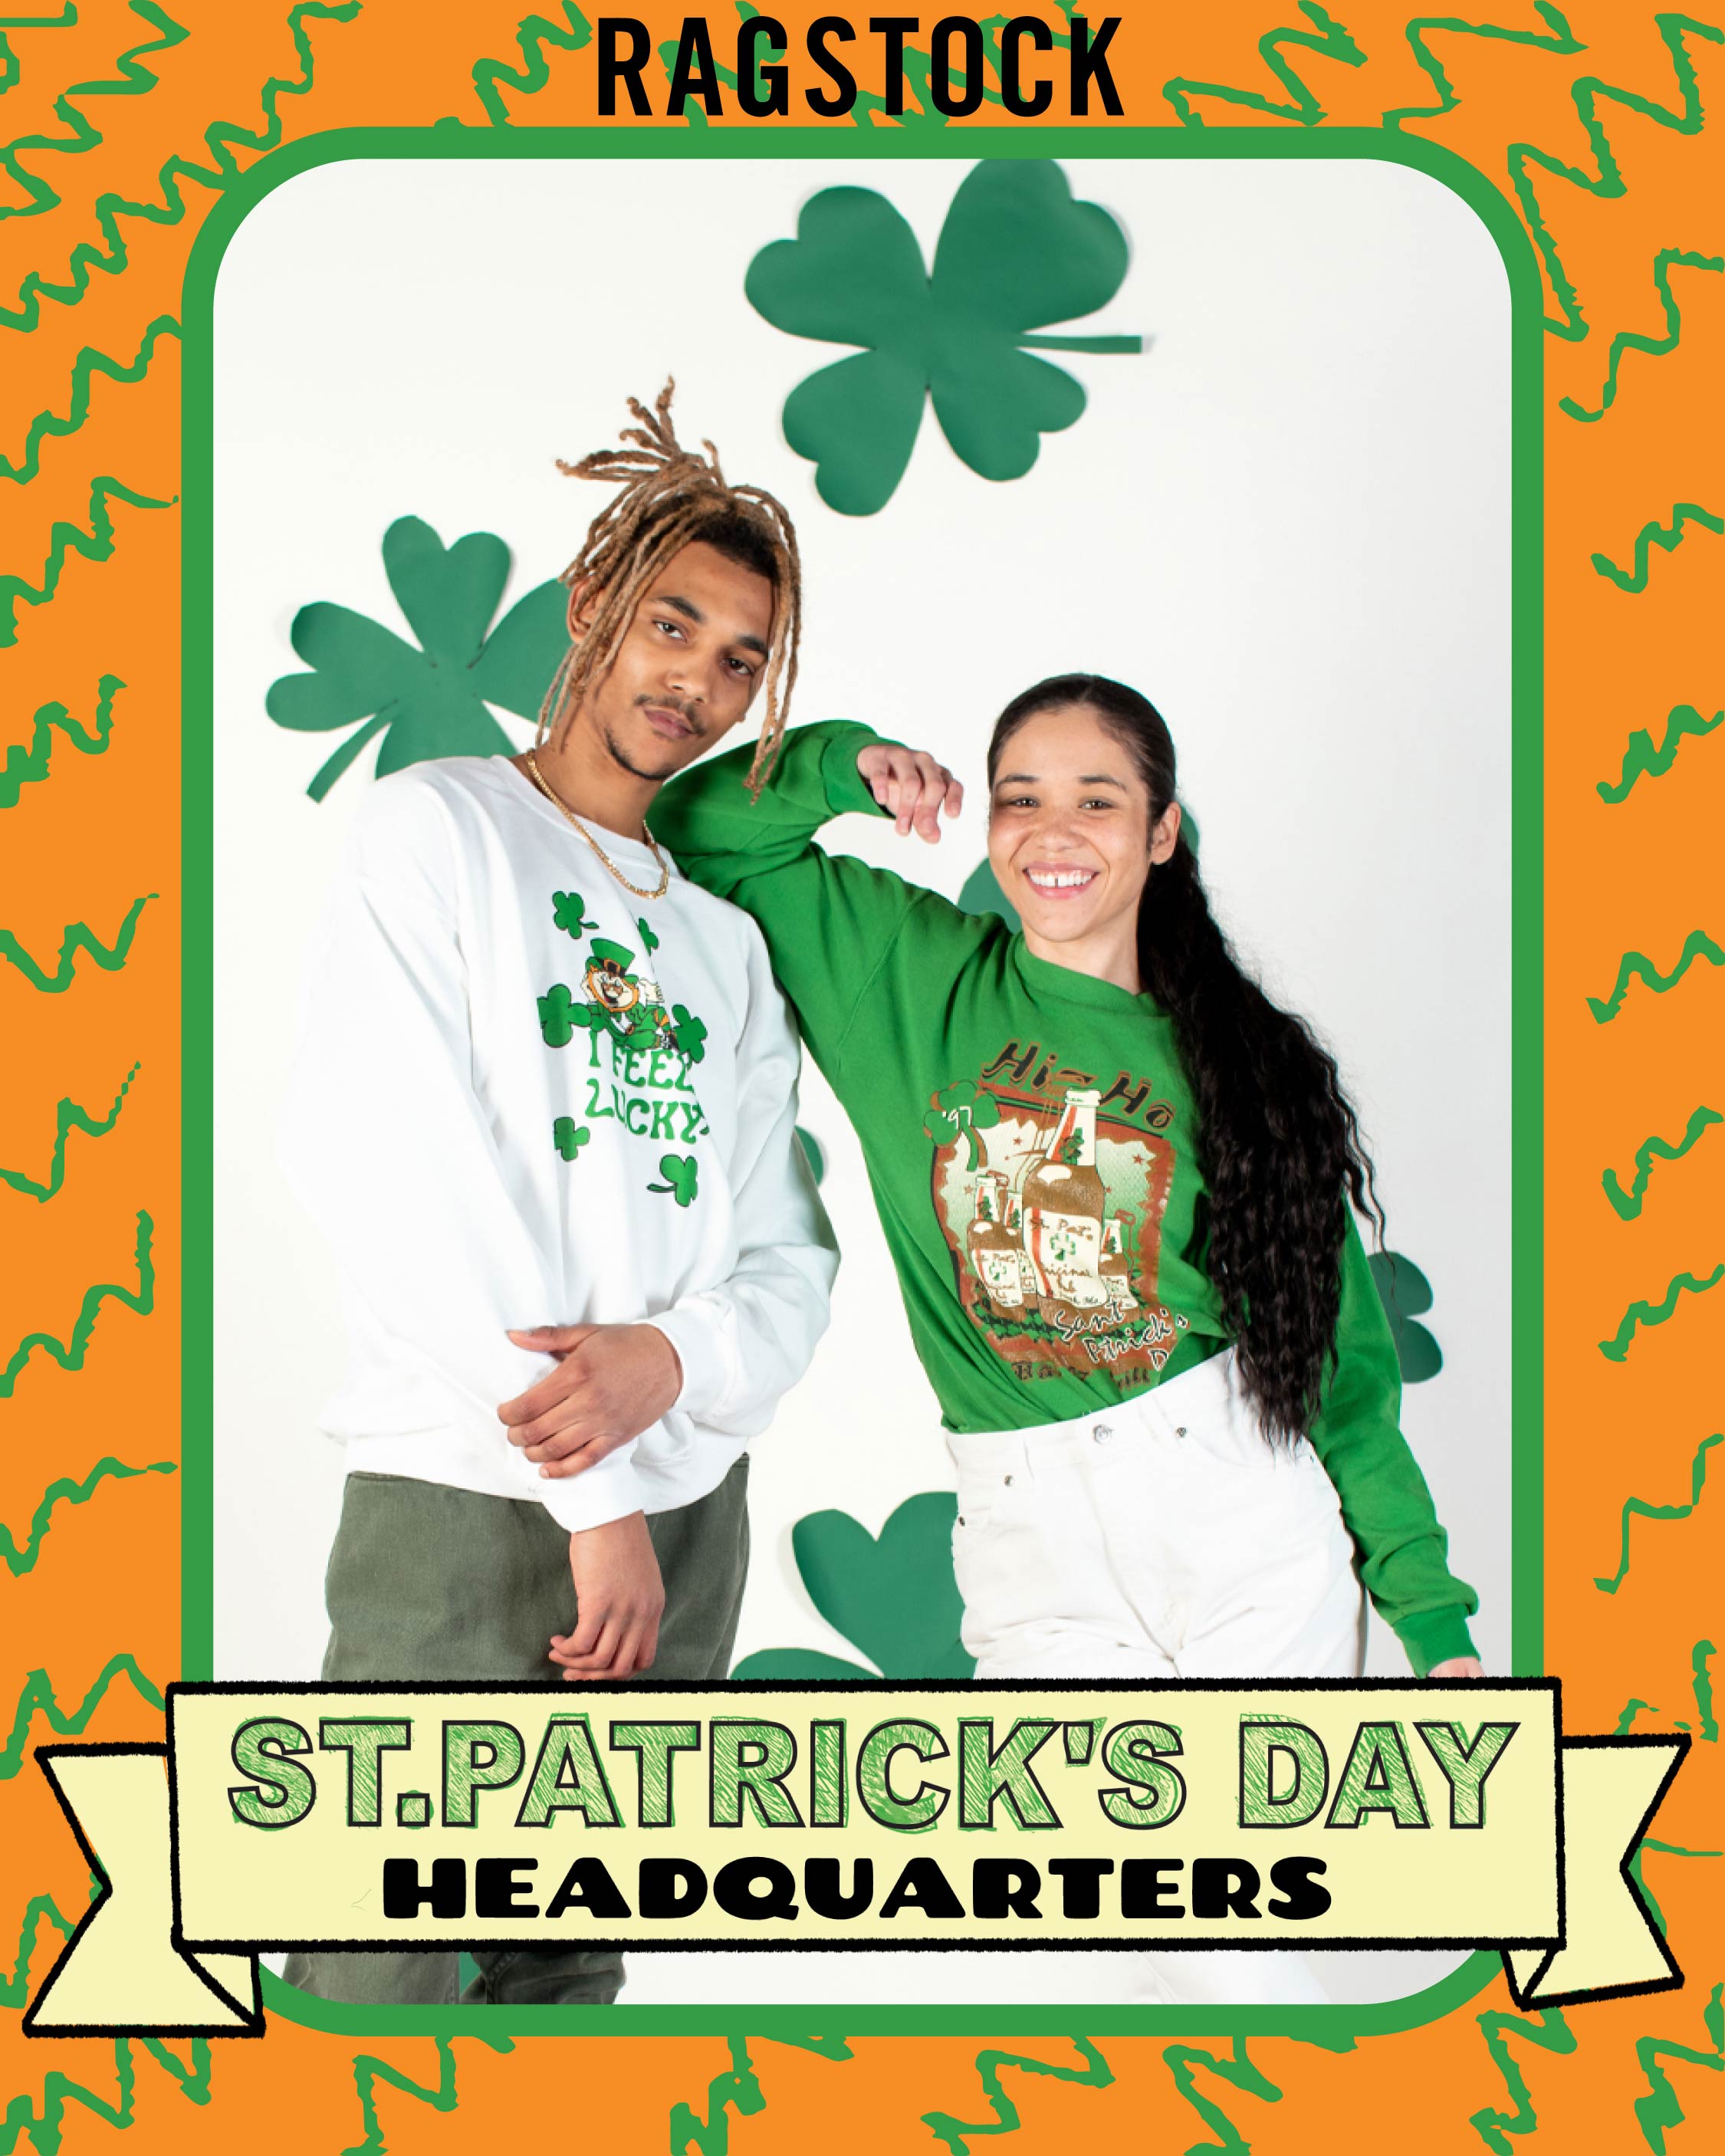 Feelin' lucky 🍀 Ragstock is your one stop shop for all things St. Pat's! from Ragstock